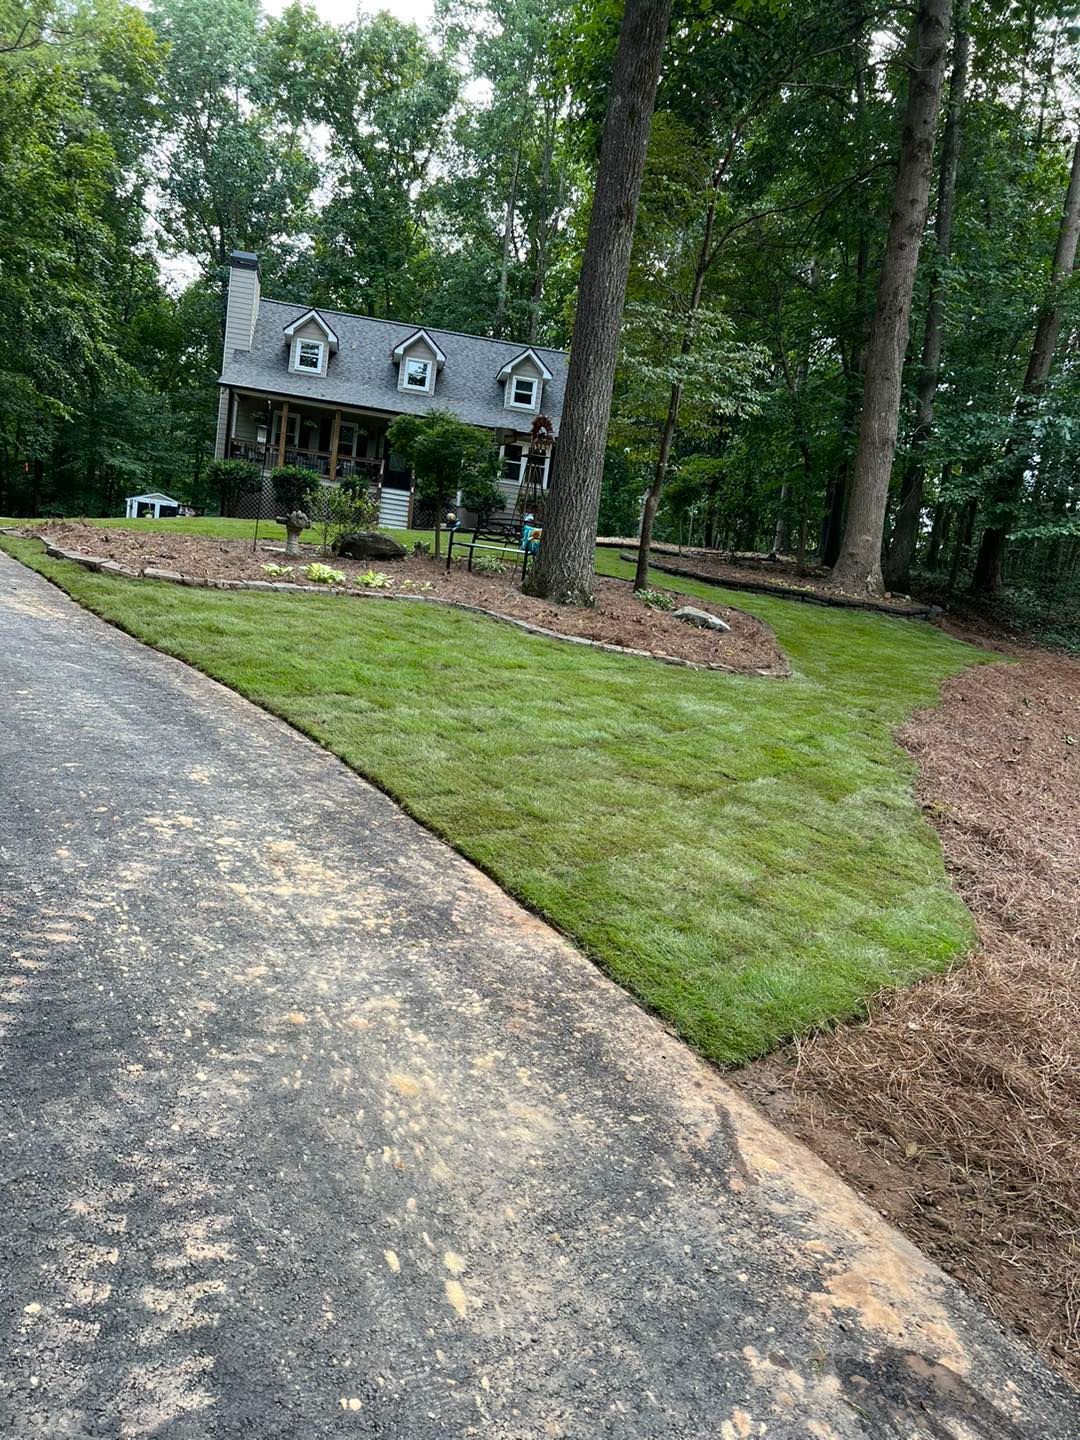 Tree Service and Landscaping Holly Springs GA